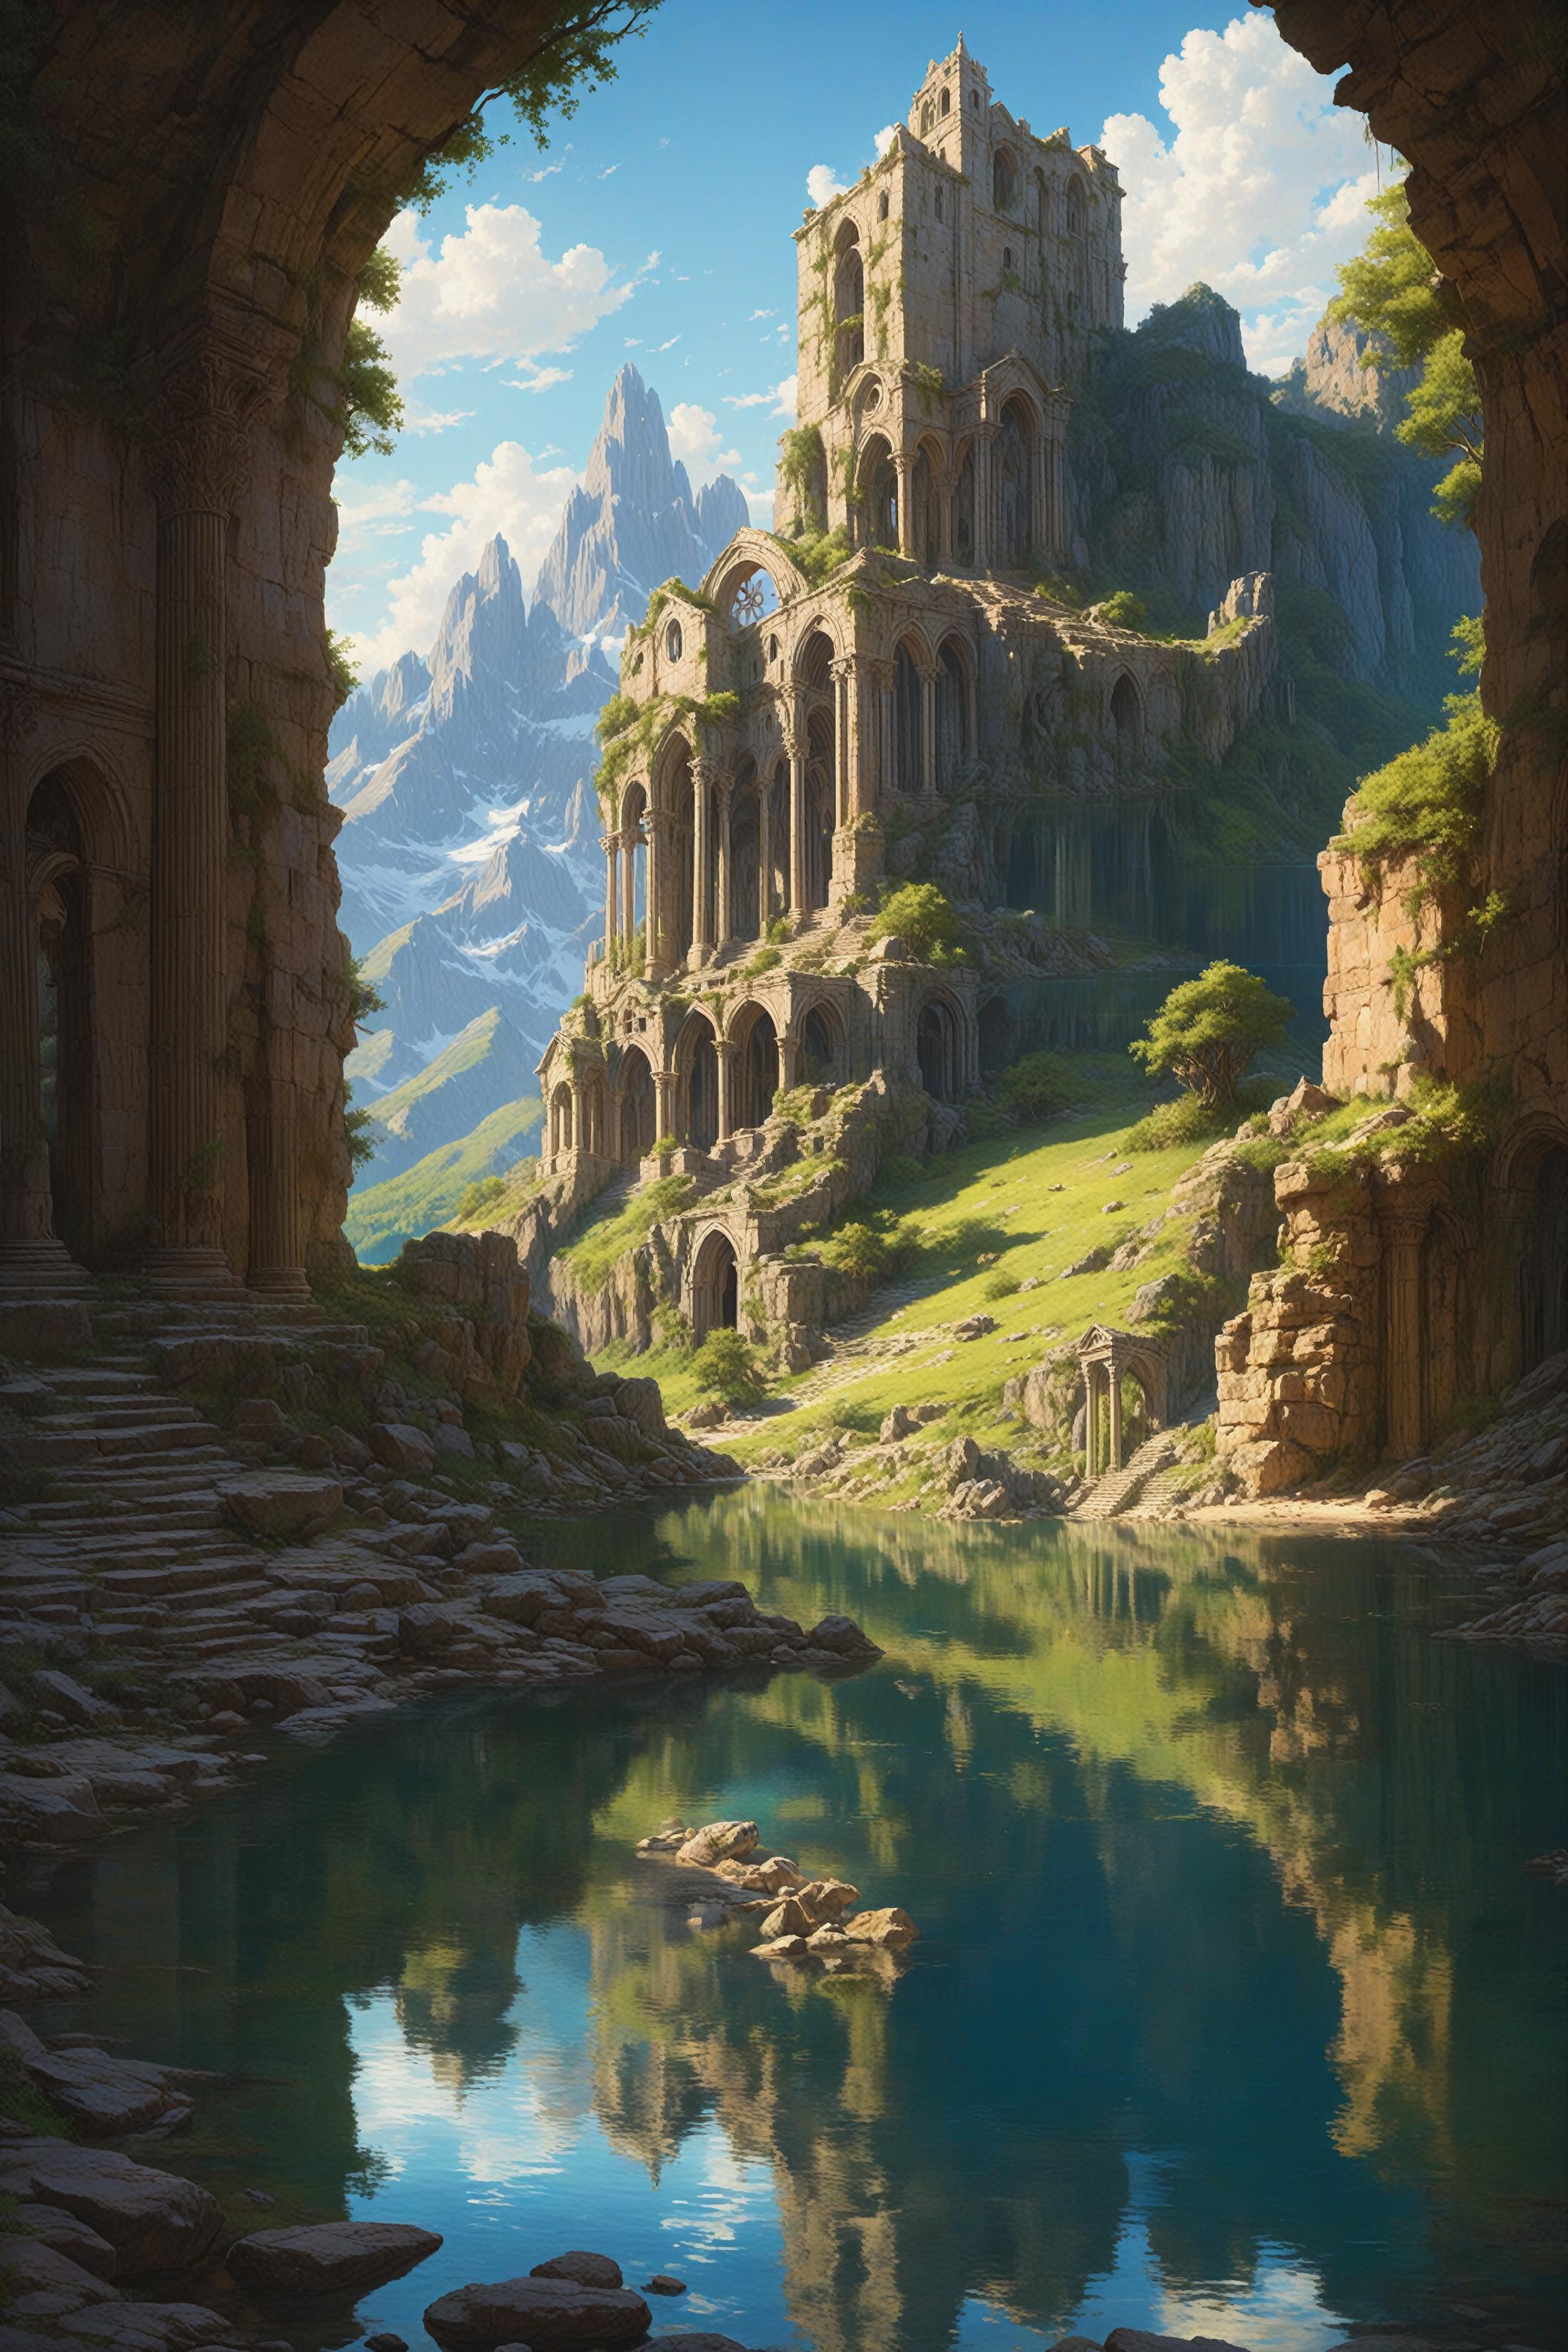 A Fantasy Art Painting of a Castle and a Mountain Lake